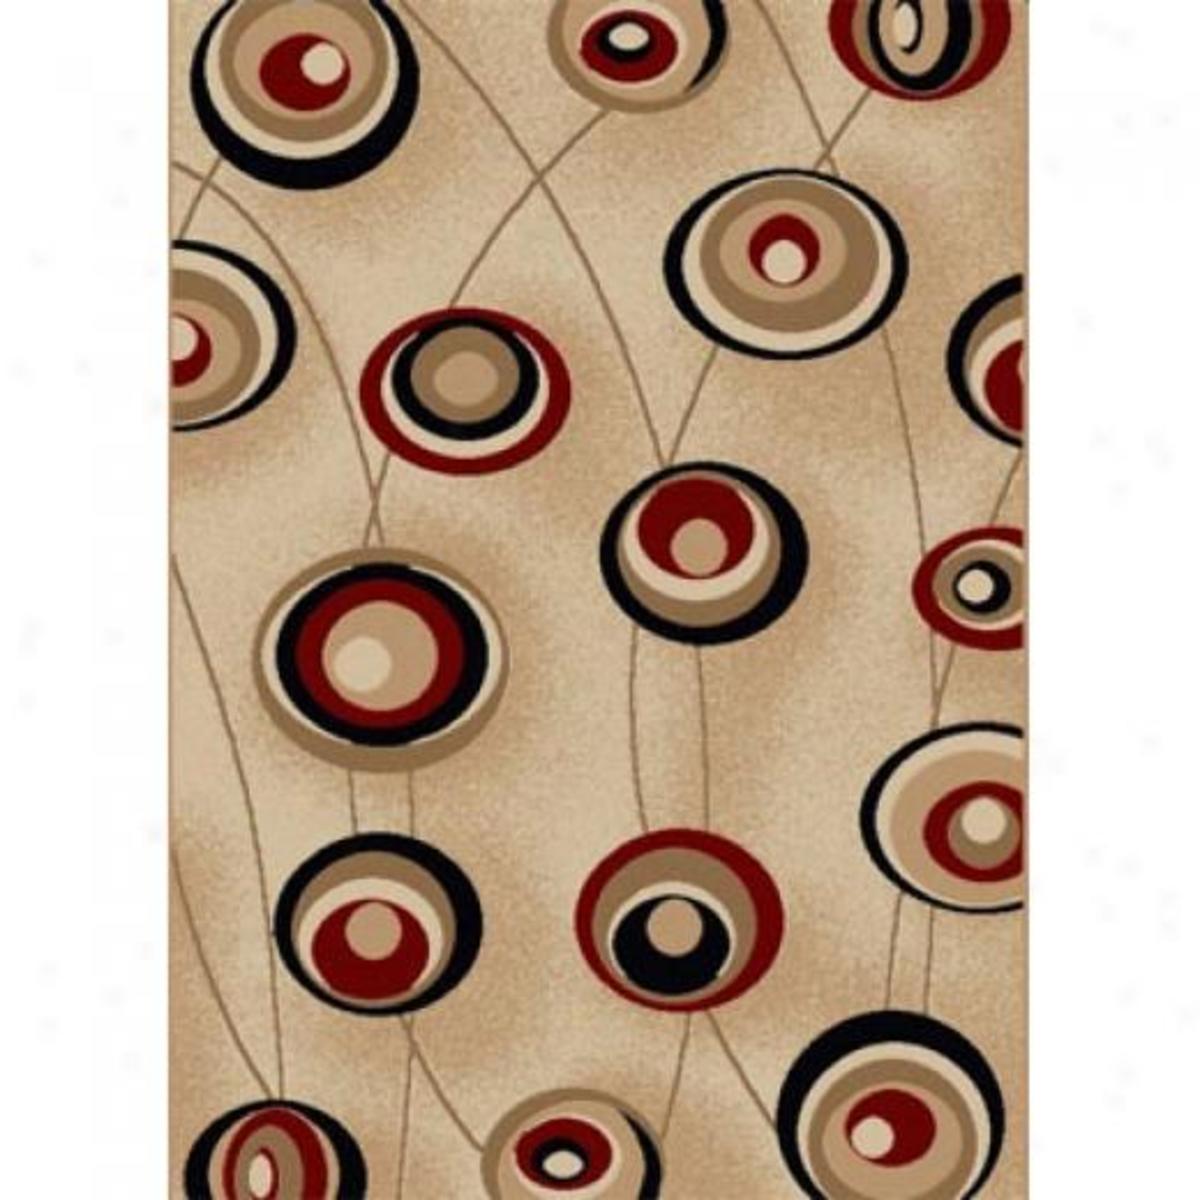 Rugs Usa The Real Review, Rugs Usa Reviews